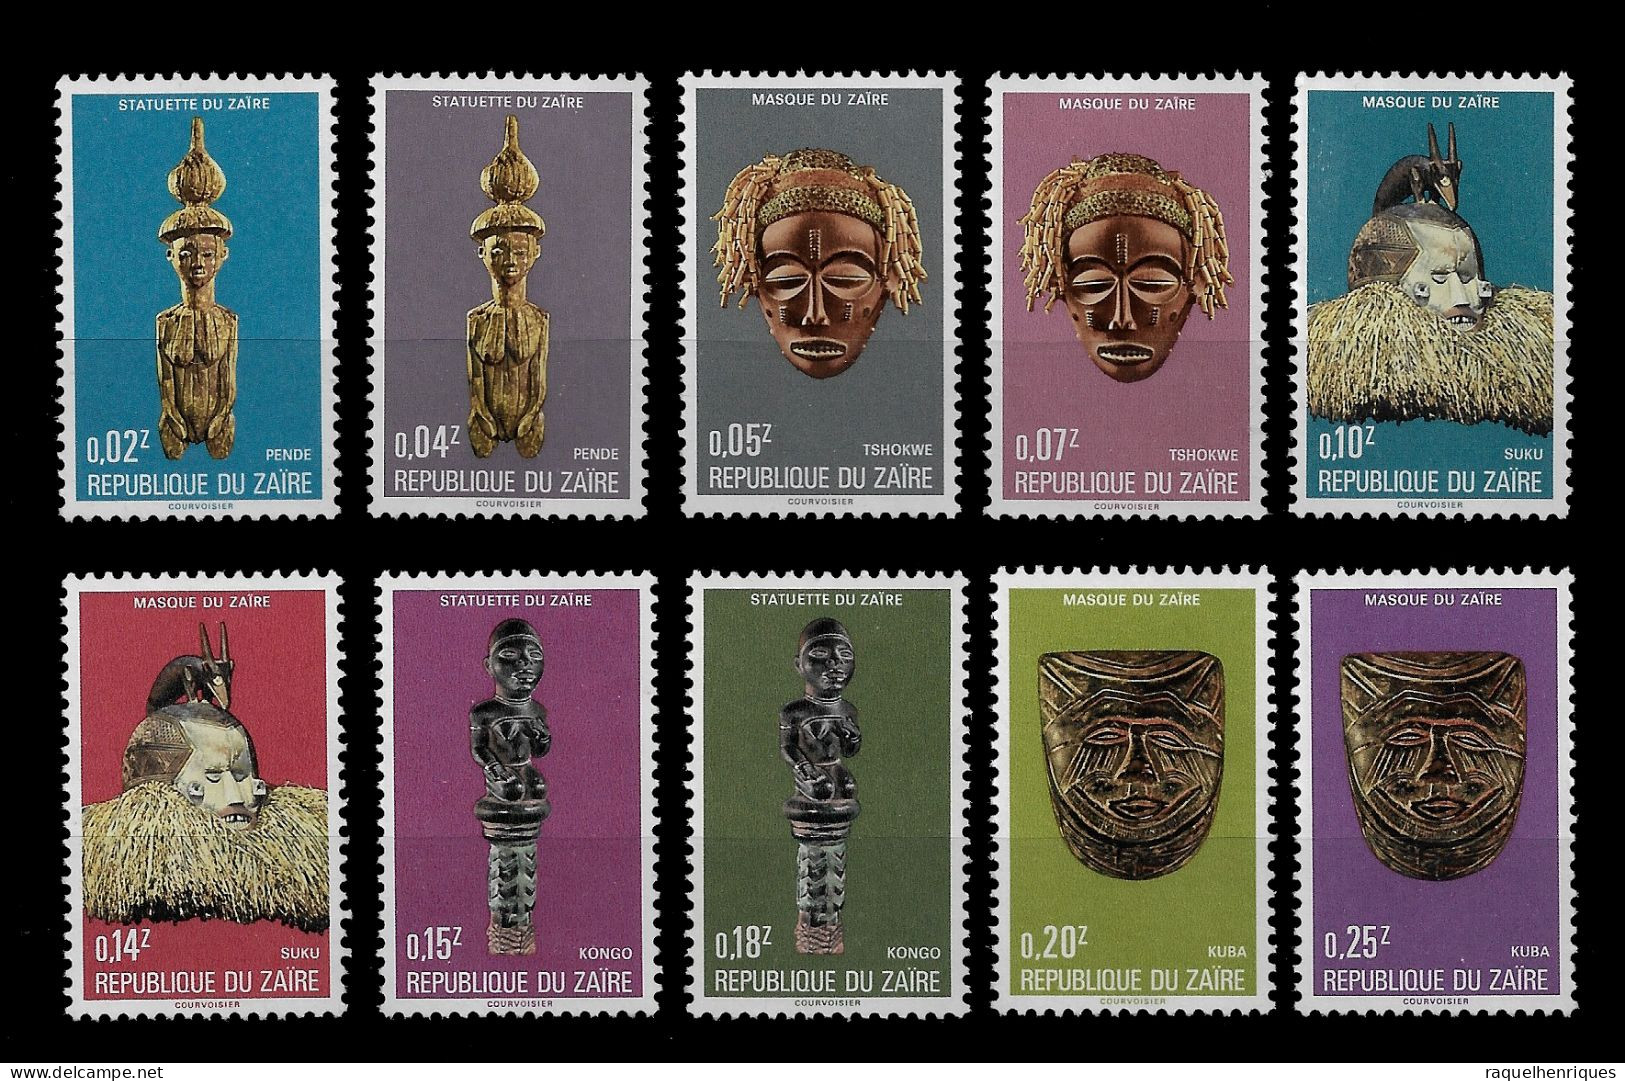 CONGO ZAIRE STAMP - 1977 Masks And Statuettes SET MNH (NP#01) - Nuovi